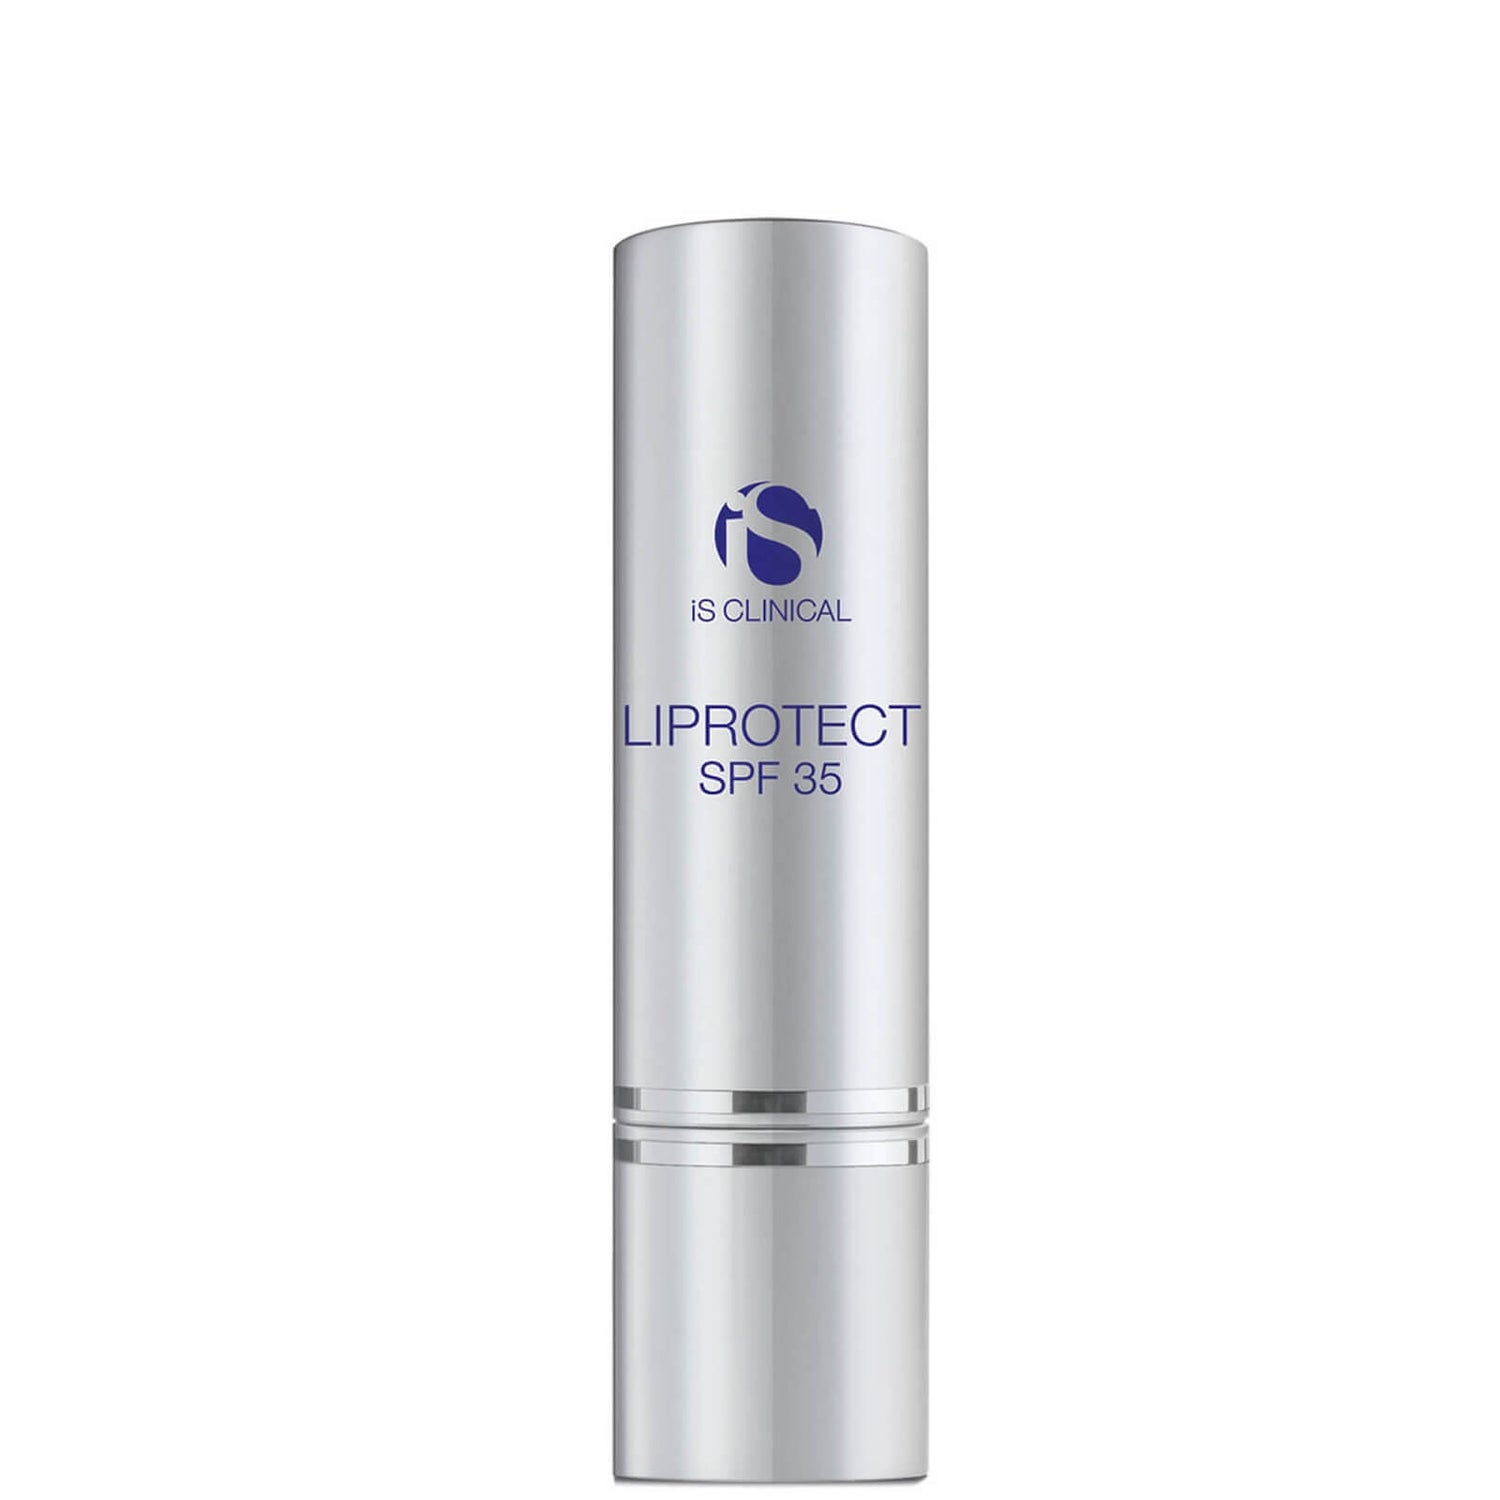 iS Clinical Liprotect SPF 35 5 g.